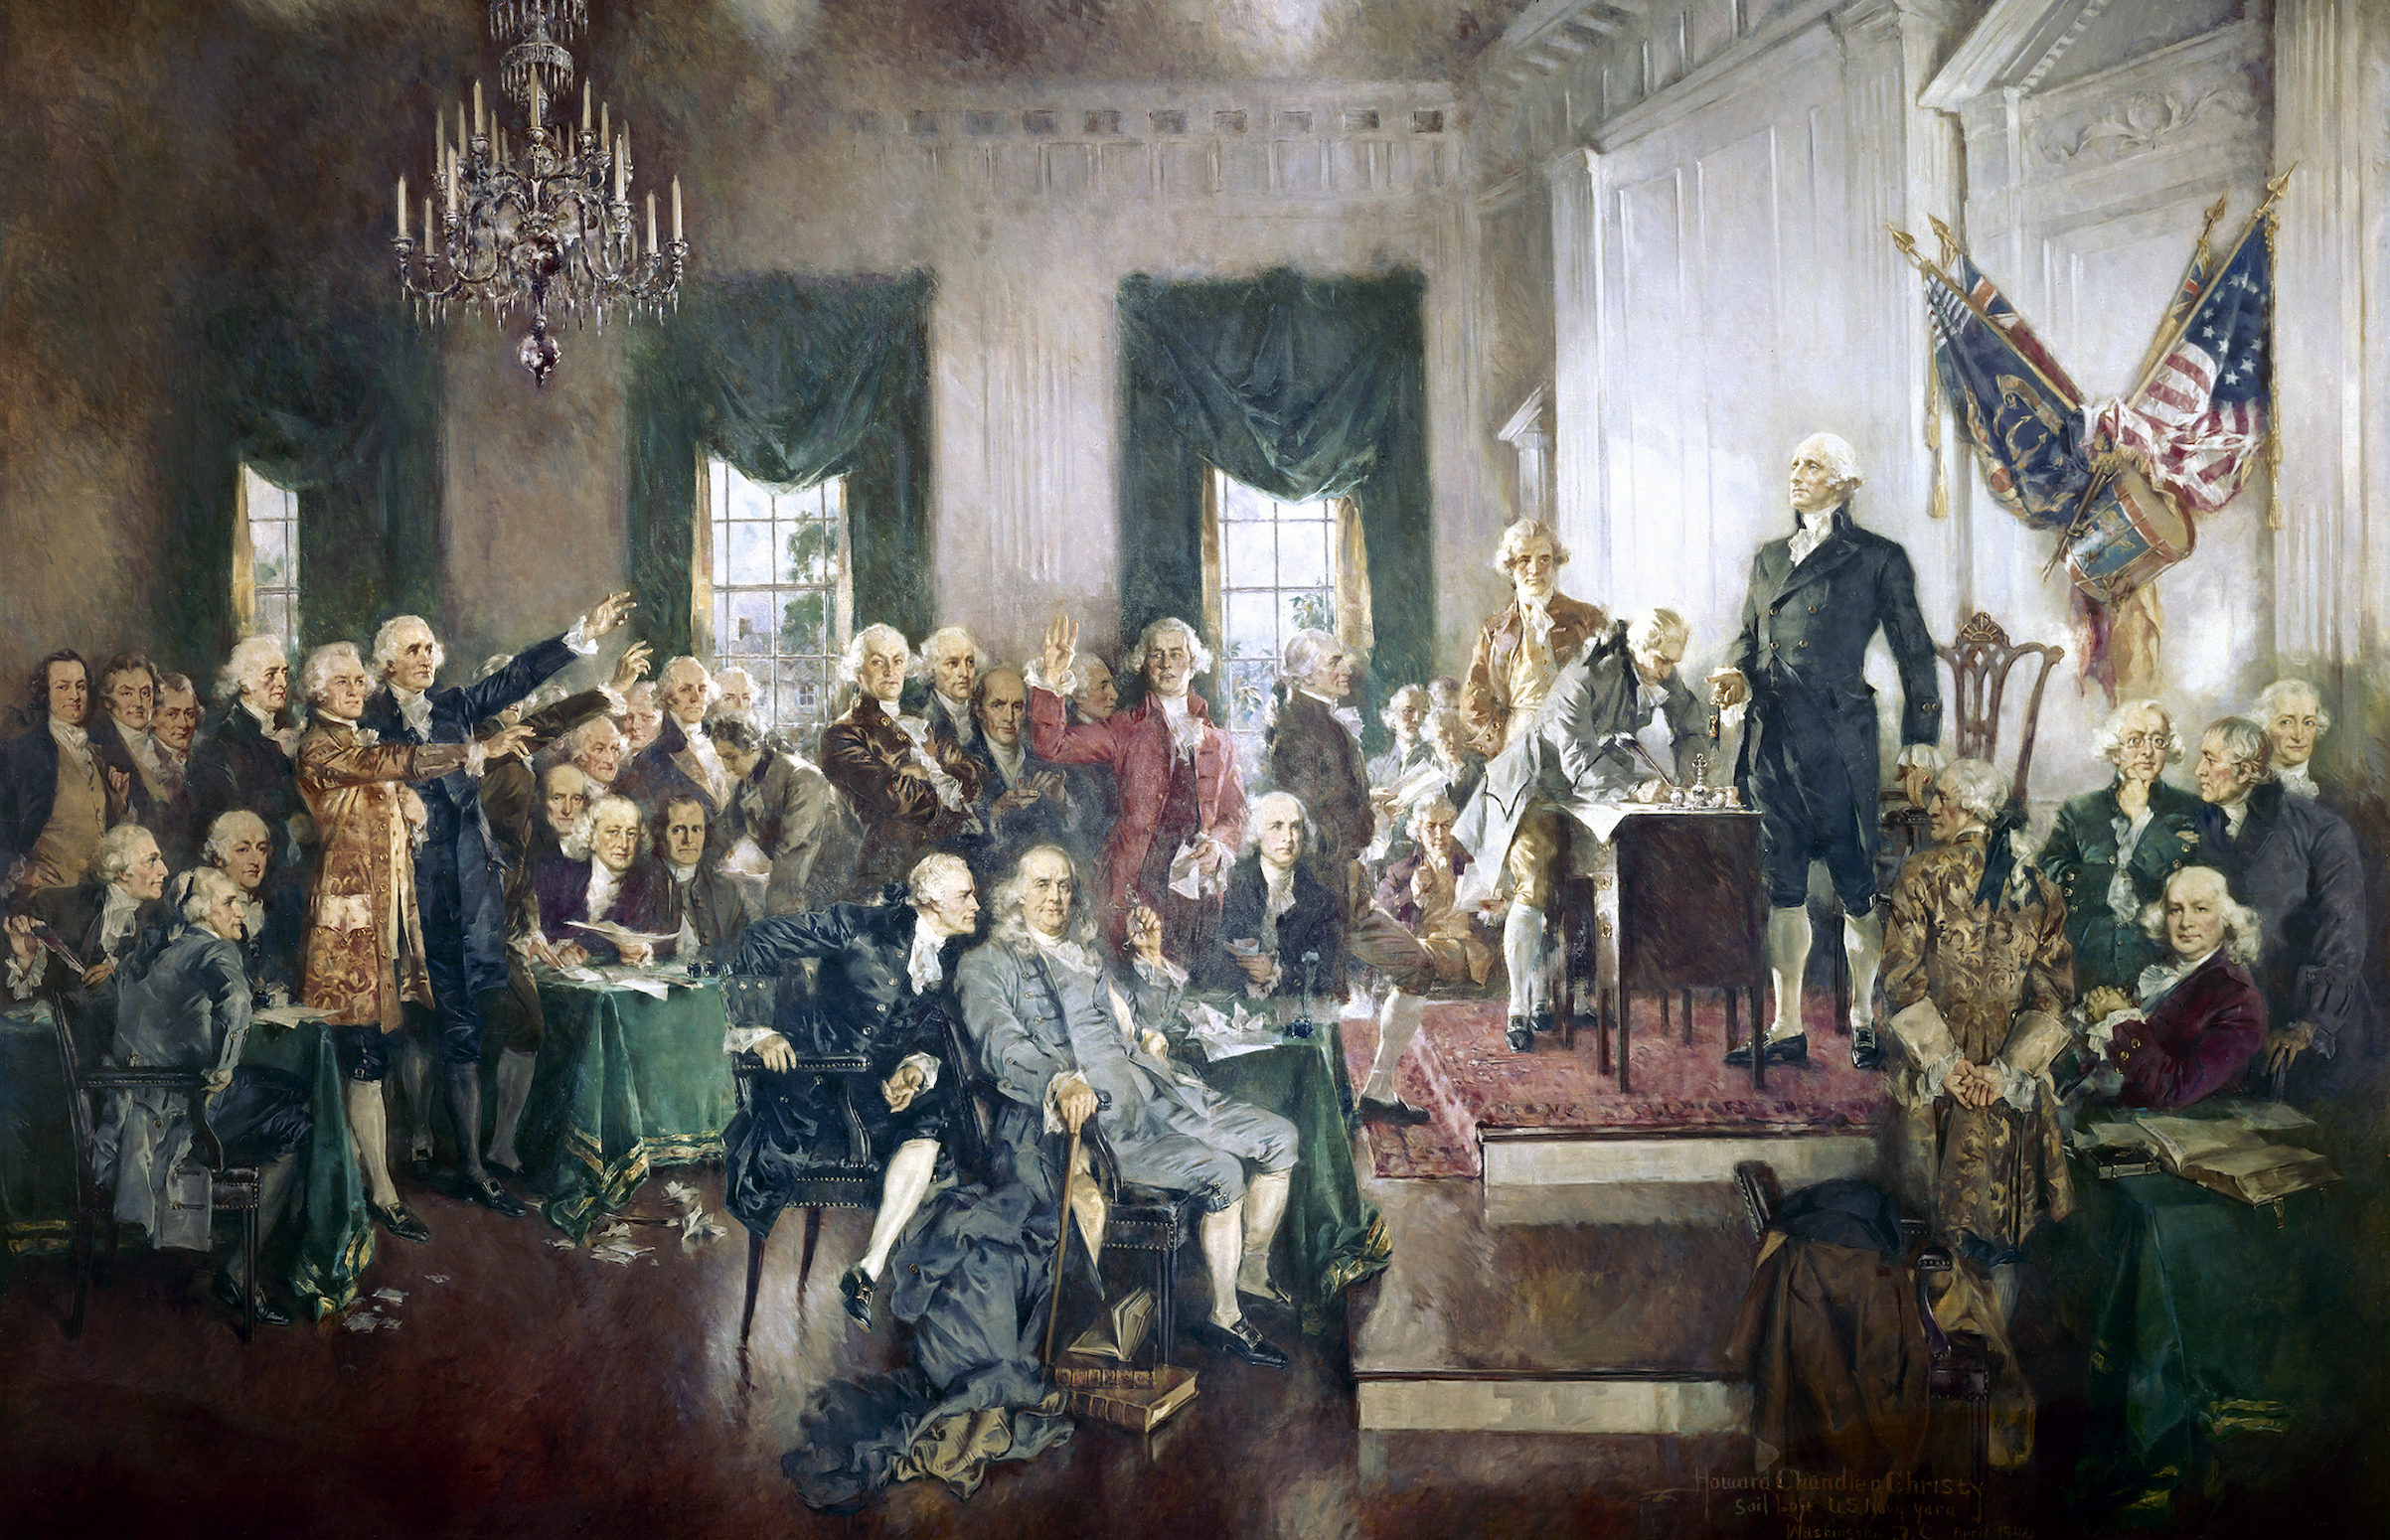 The Signing of the Constitution of the United States, oil painting on canvas by Howard Chandler Christy, 1940. The painting hangs in the United States Capitol building. (Getty Images)